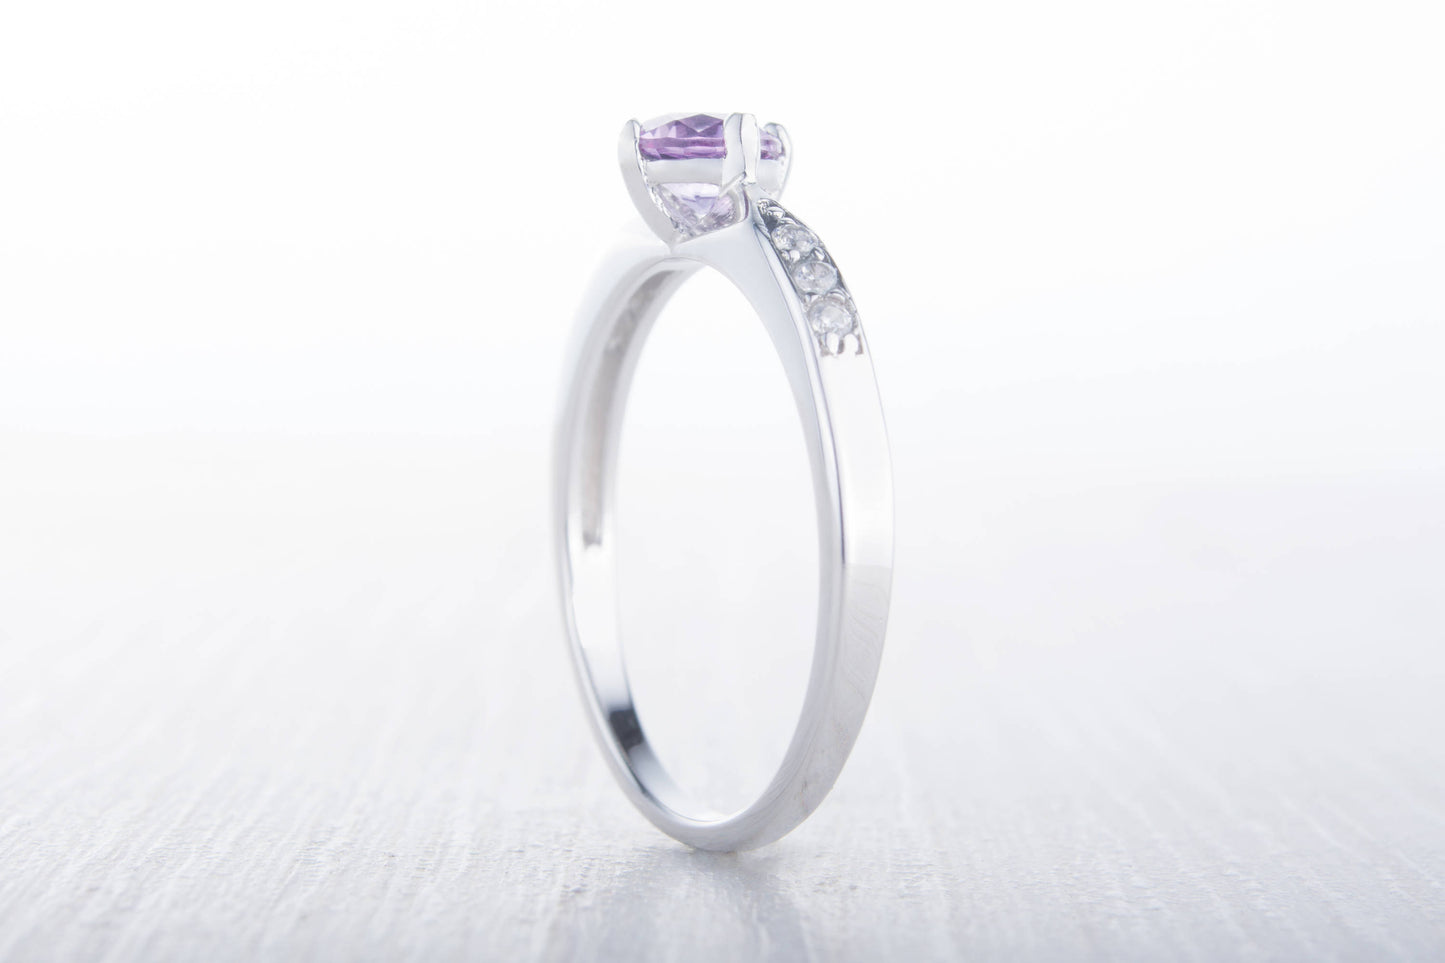 Alexandrite Solitaire engagement ring - available in sterling silver or white gold - handmade engagement ring - wedding ring